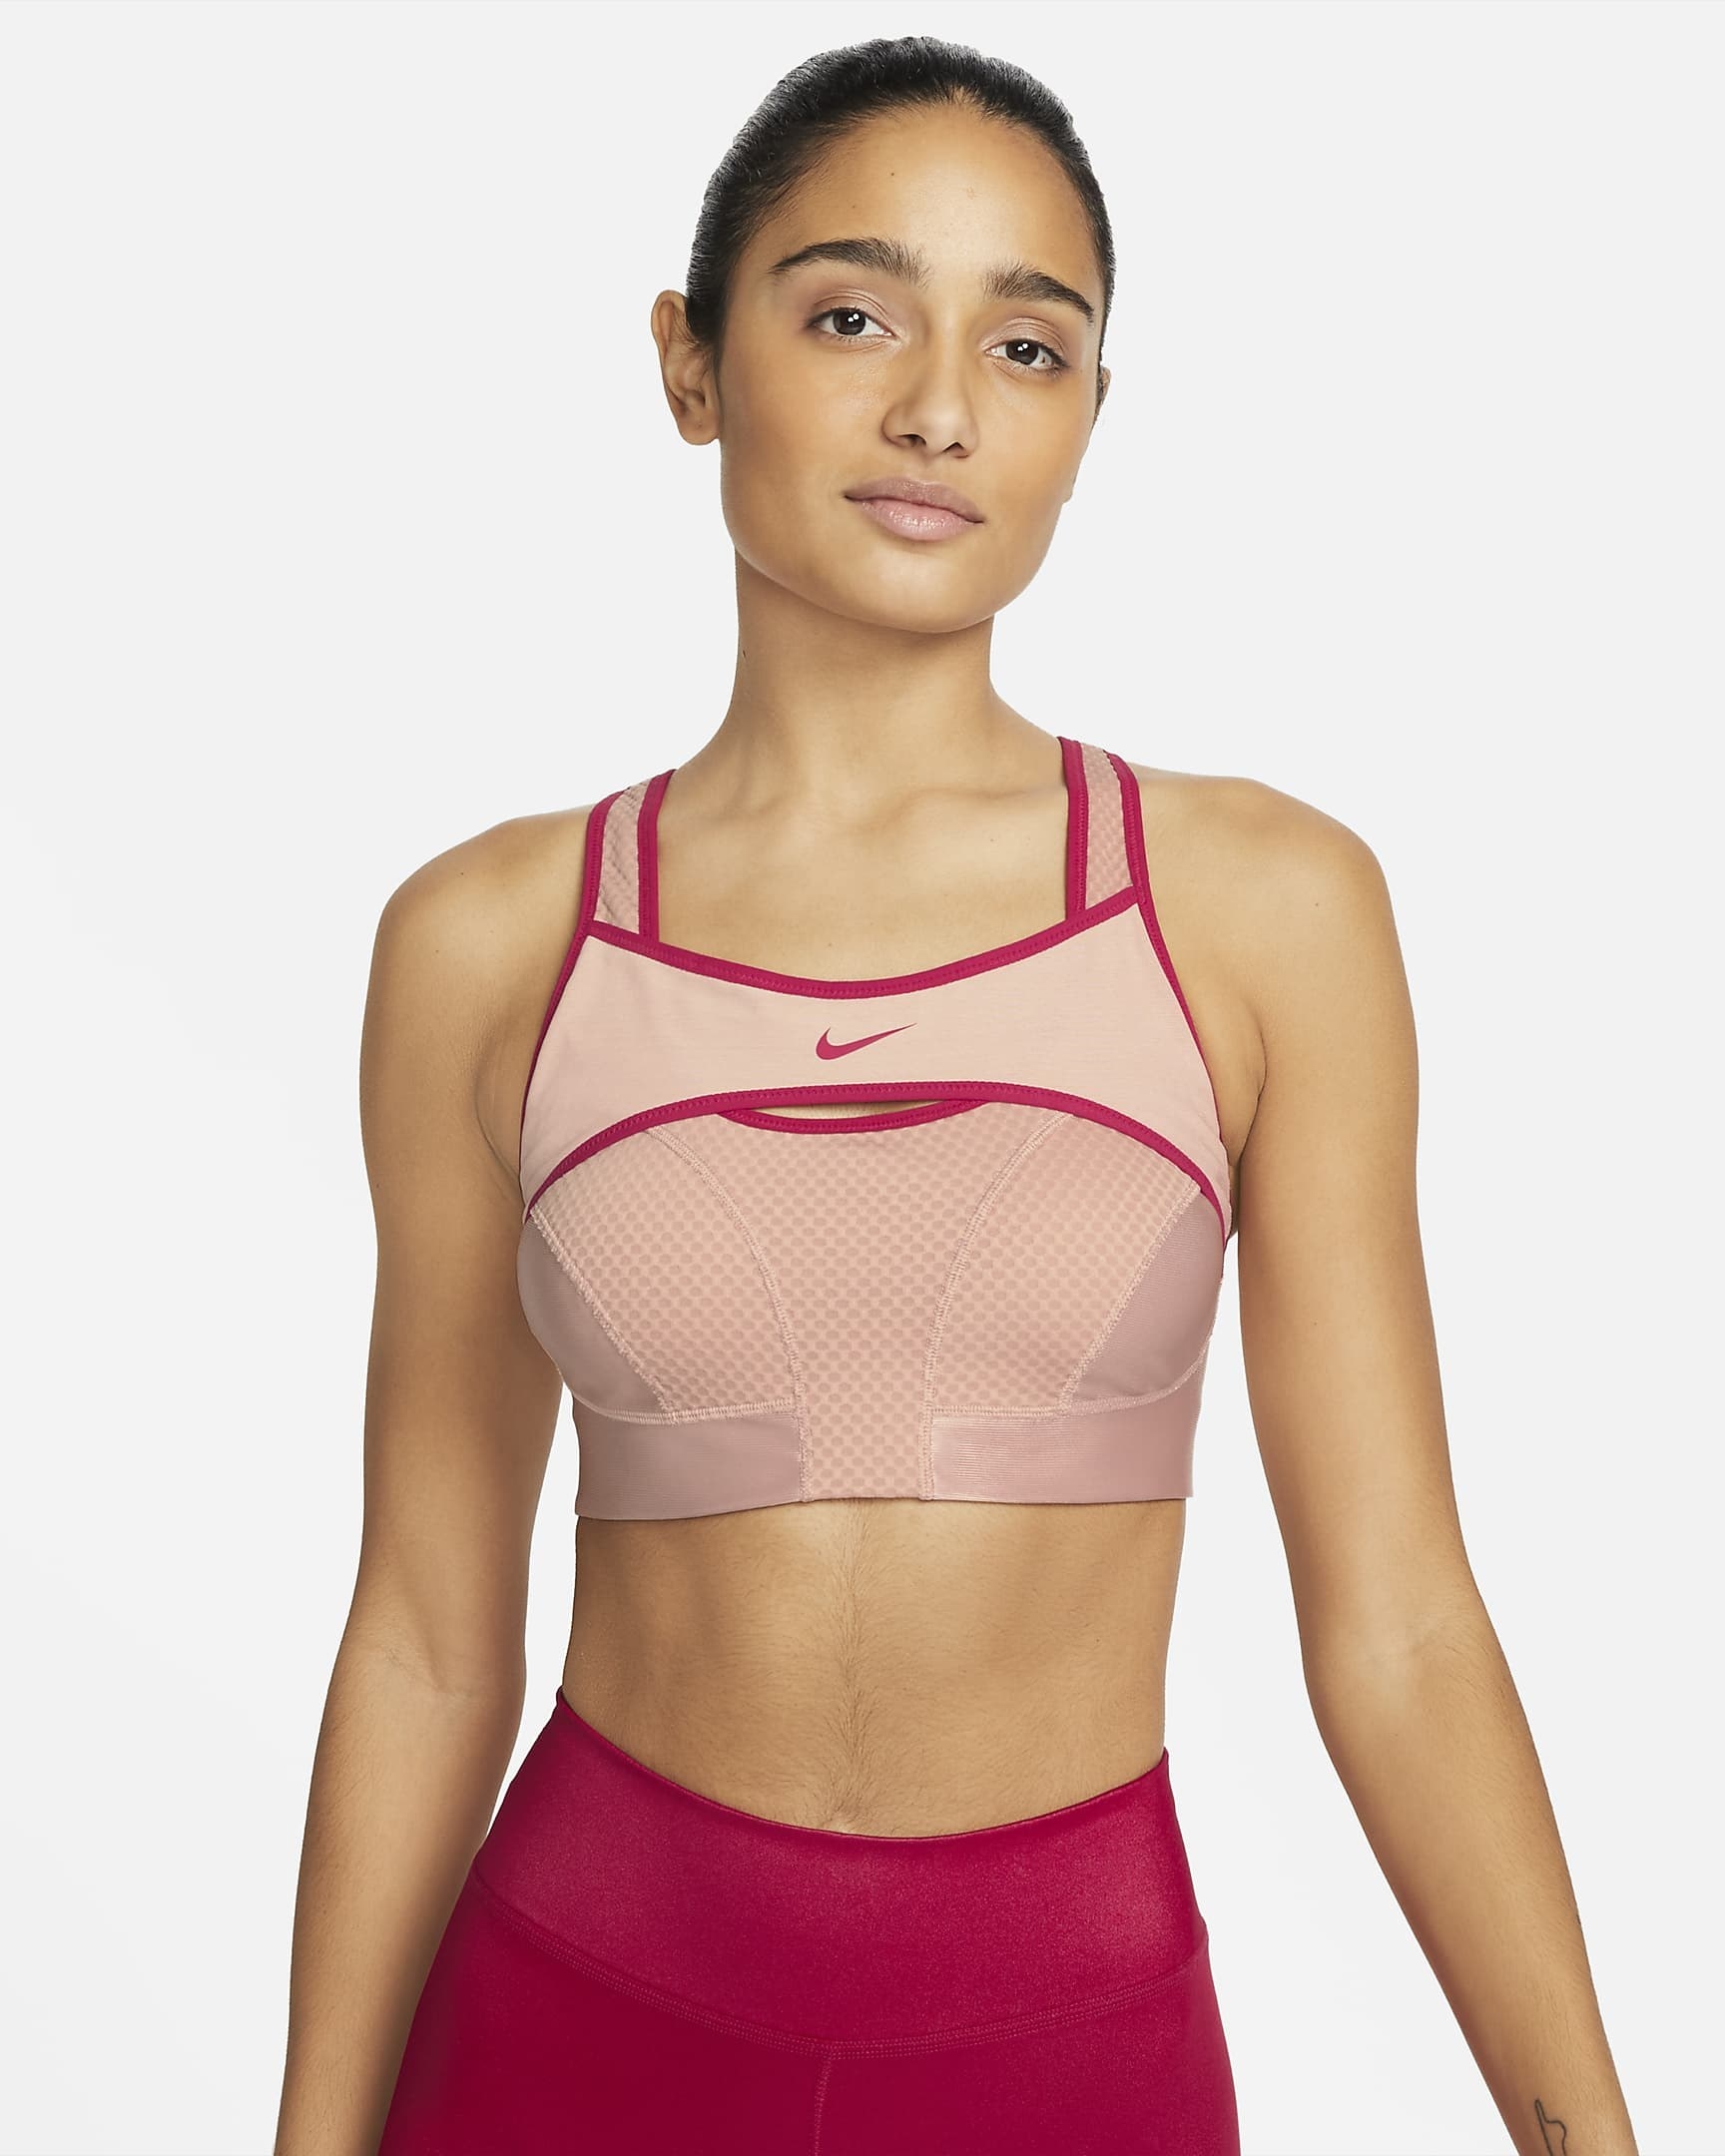 model in two-tone pink sports bra with an additional panel of fabric across the chest